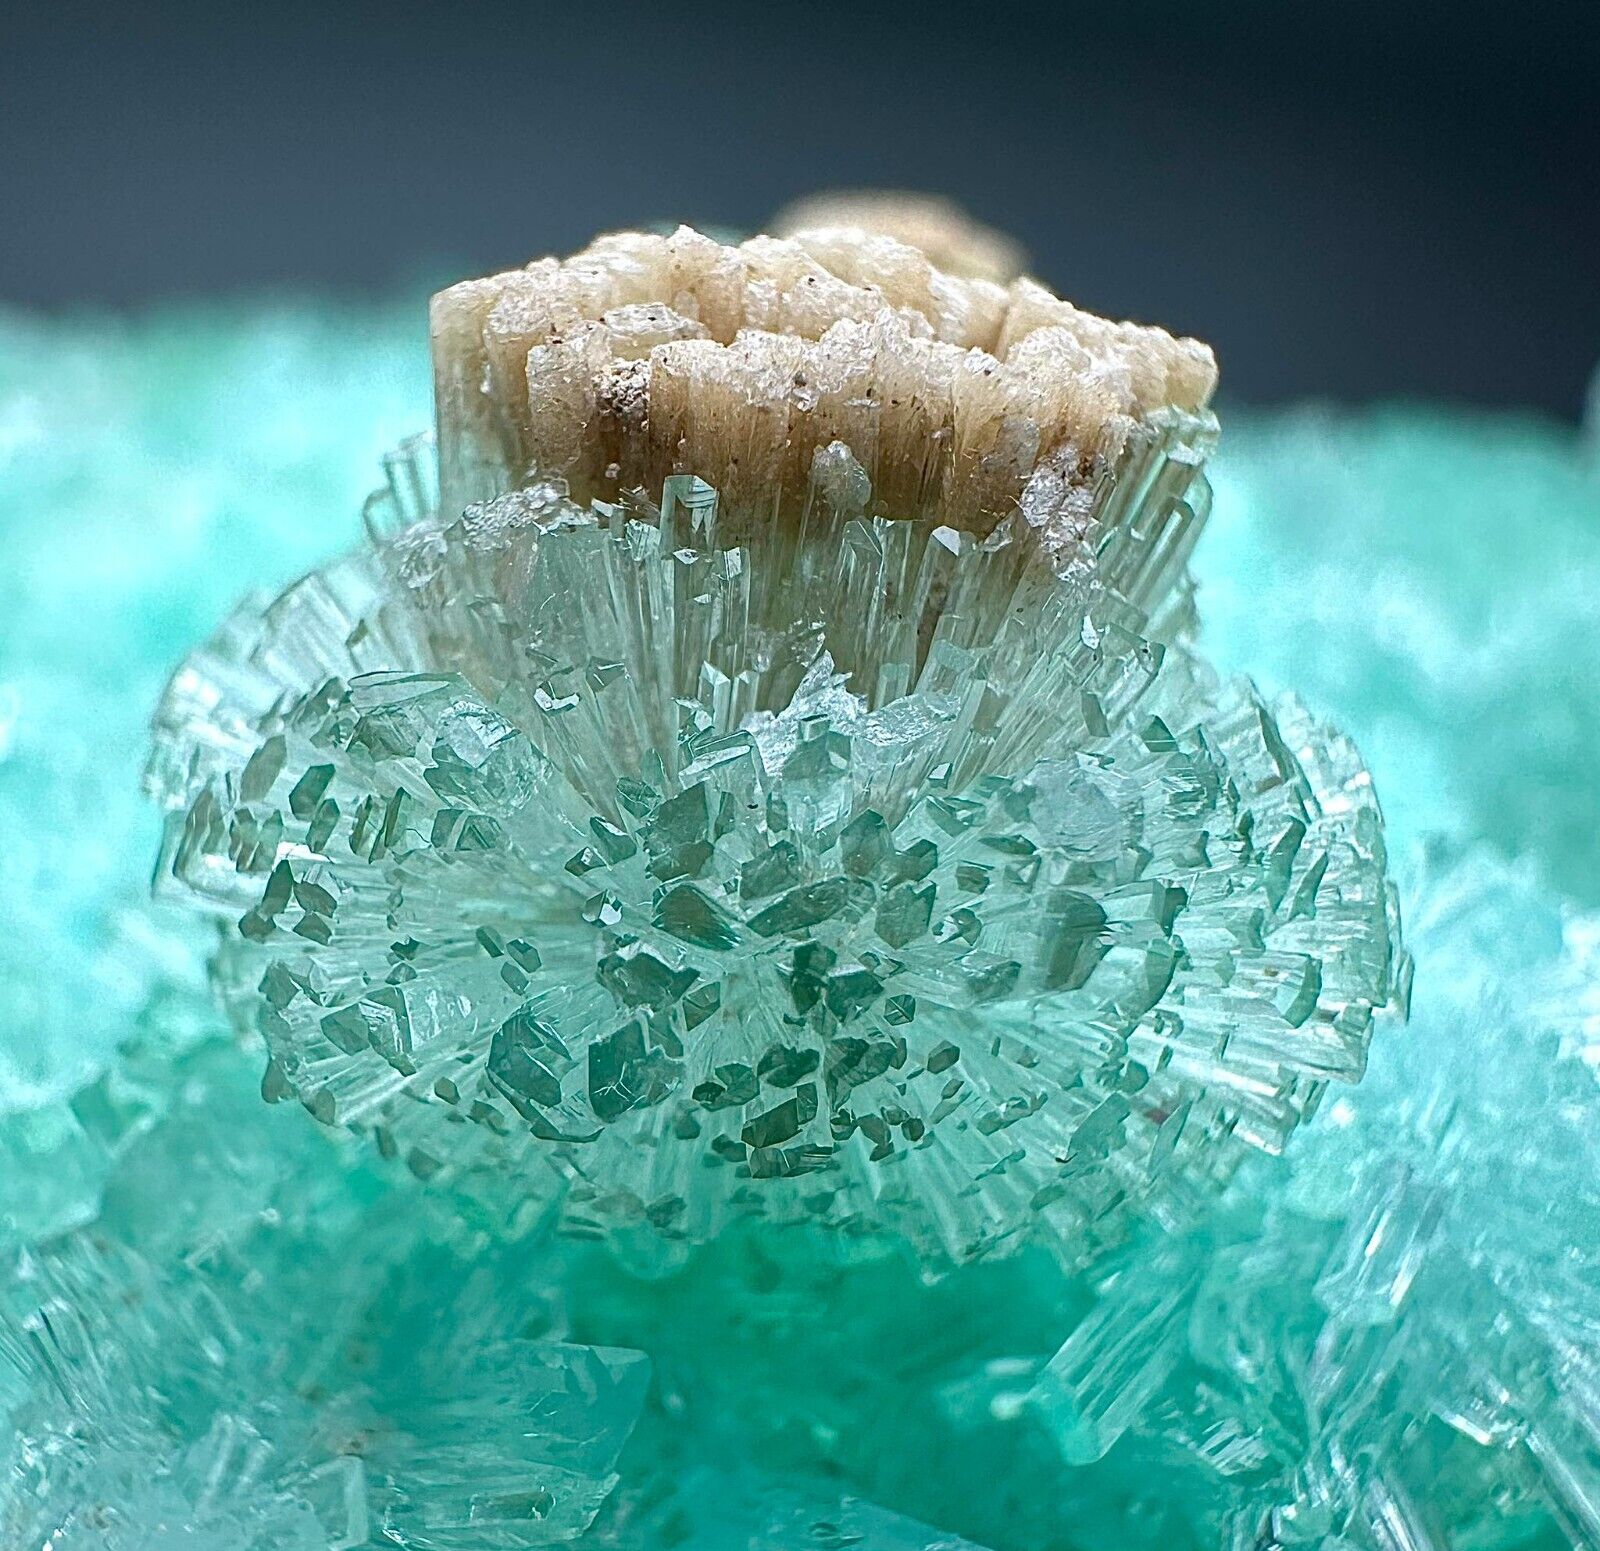 484 GR Extremely Beautiful Aragonite Crystals Specimen From Helmand Afghanistan